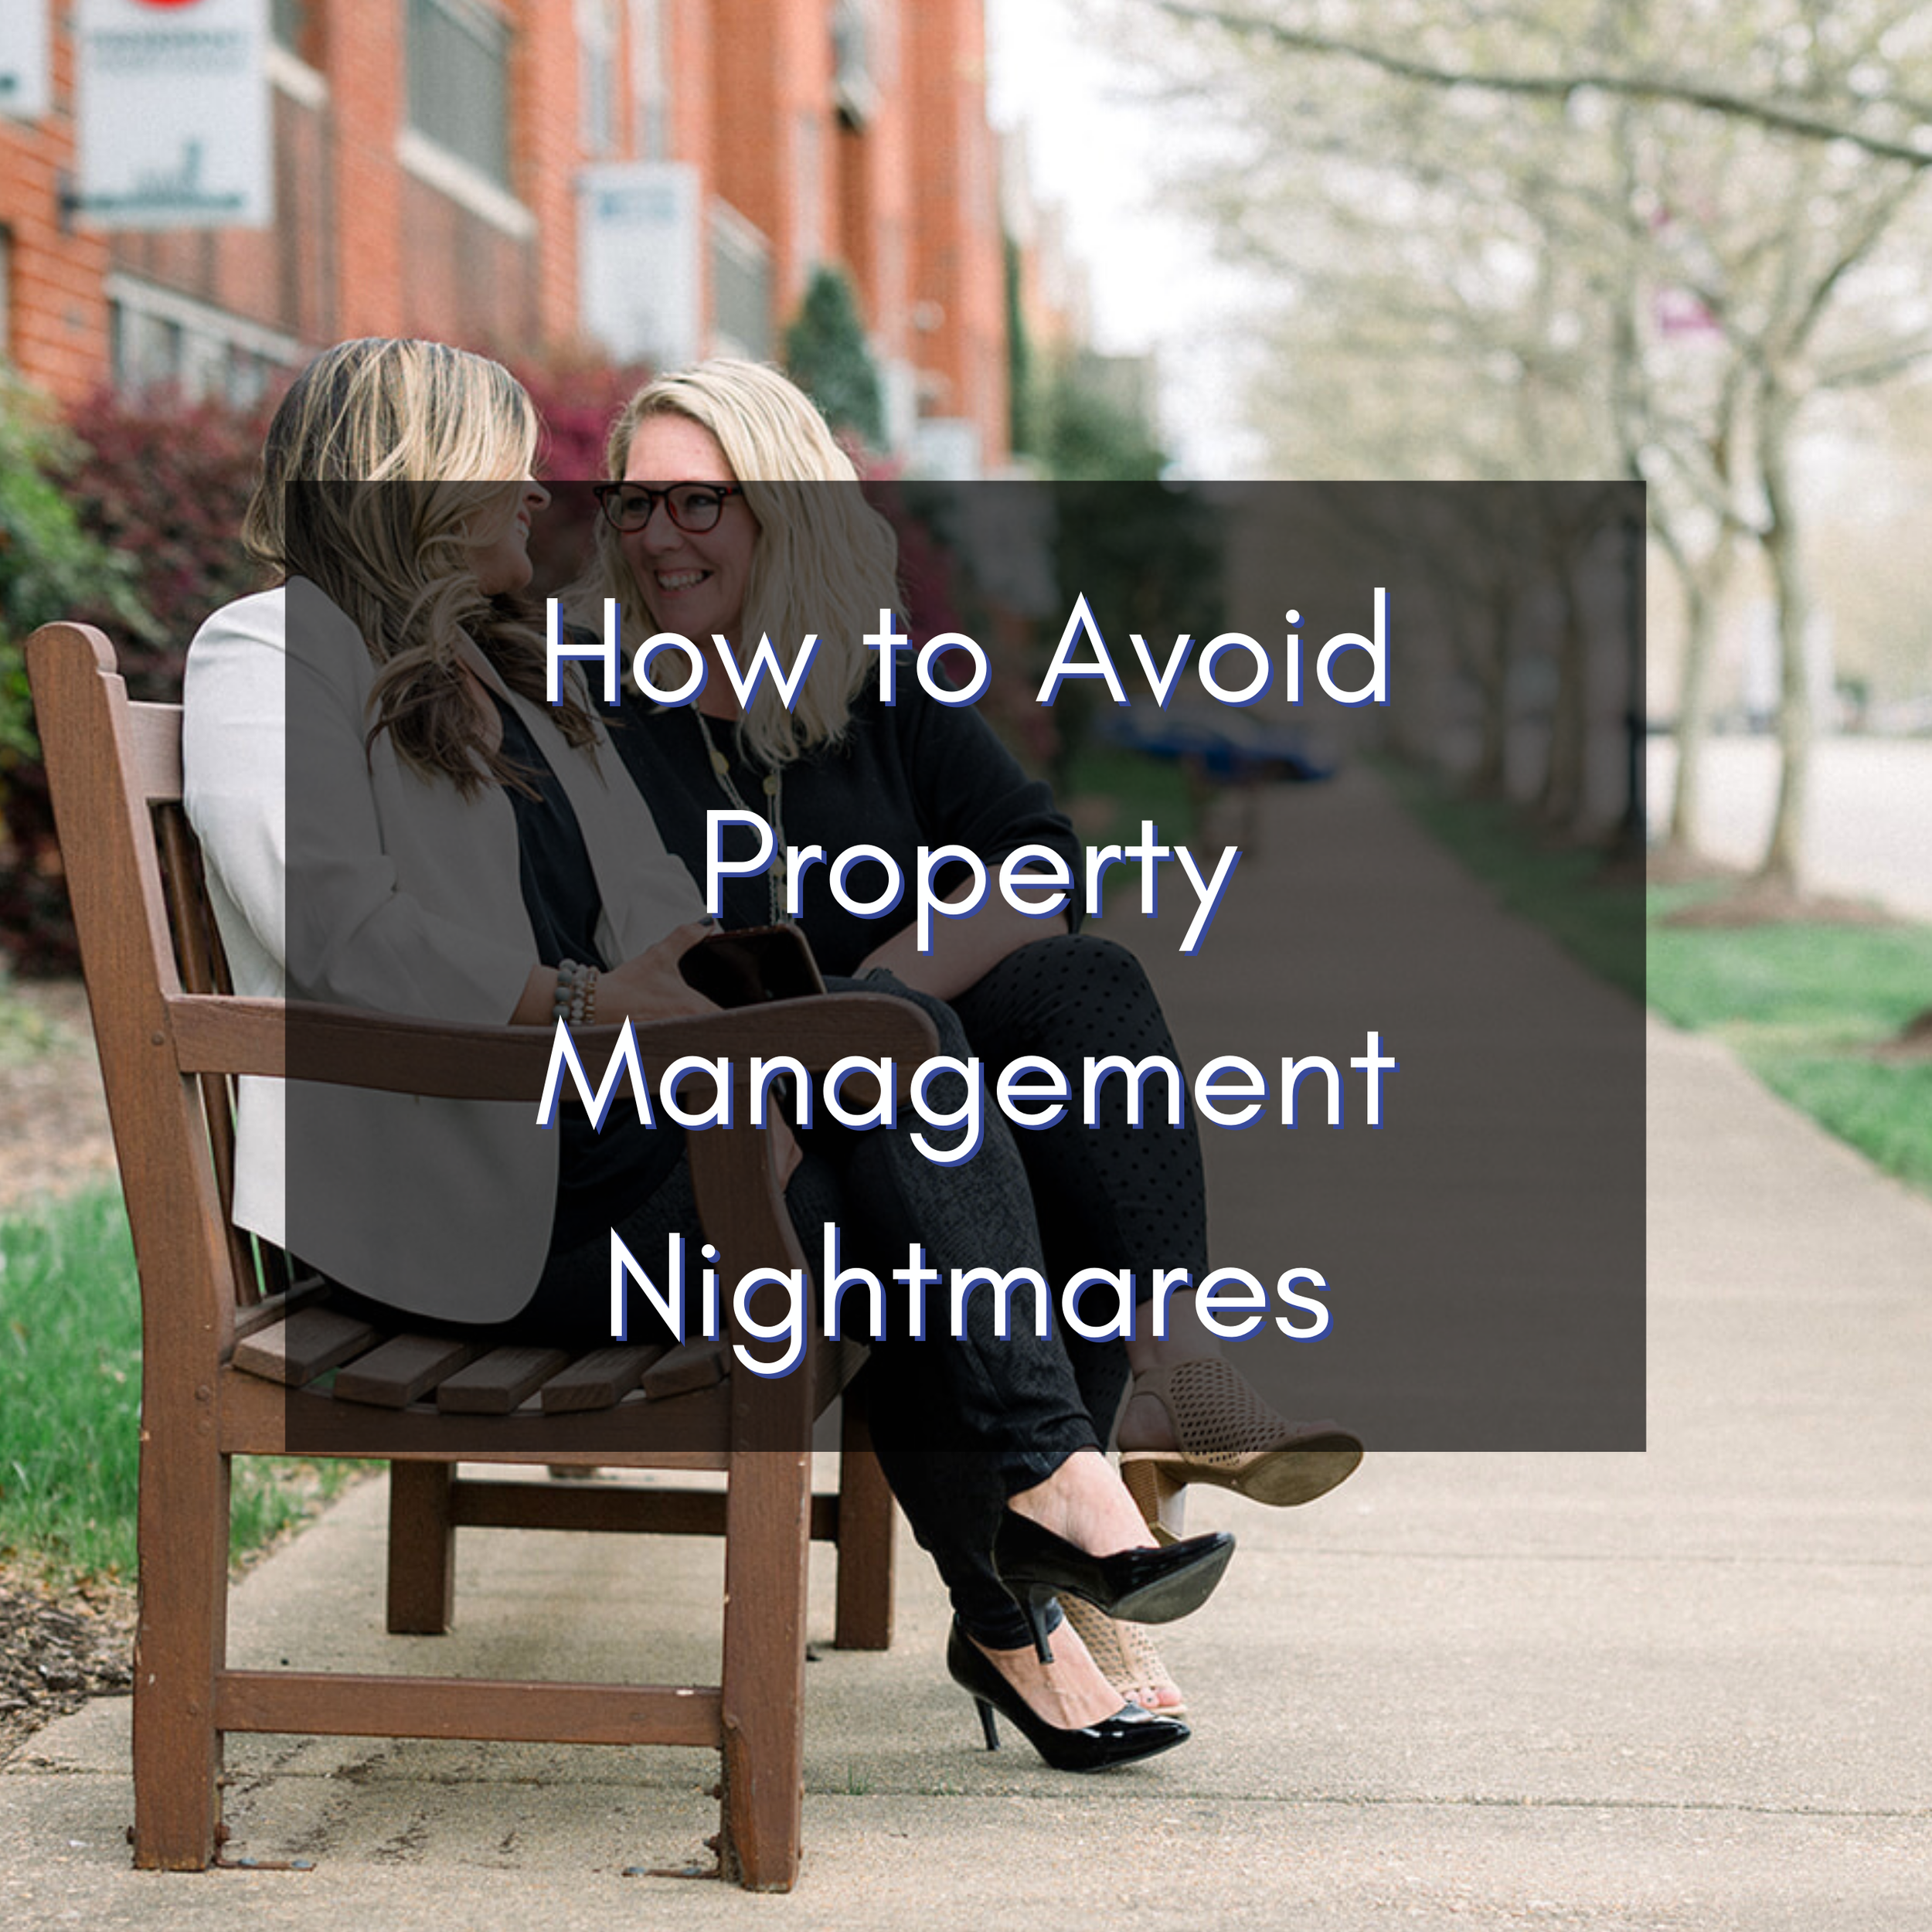 How to Avoid Property Management Nightmares